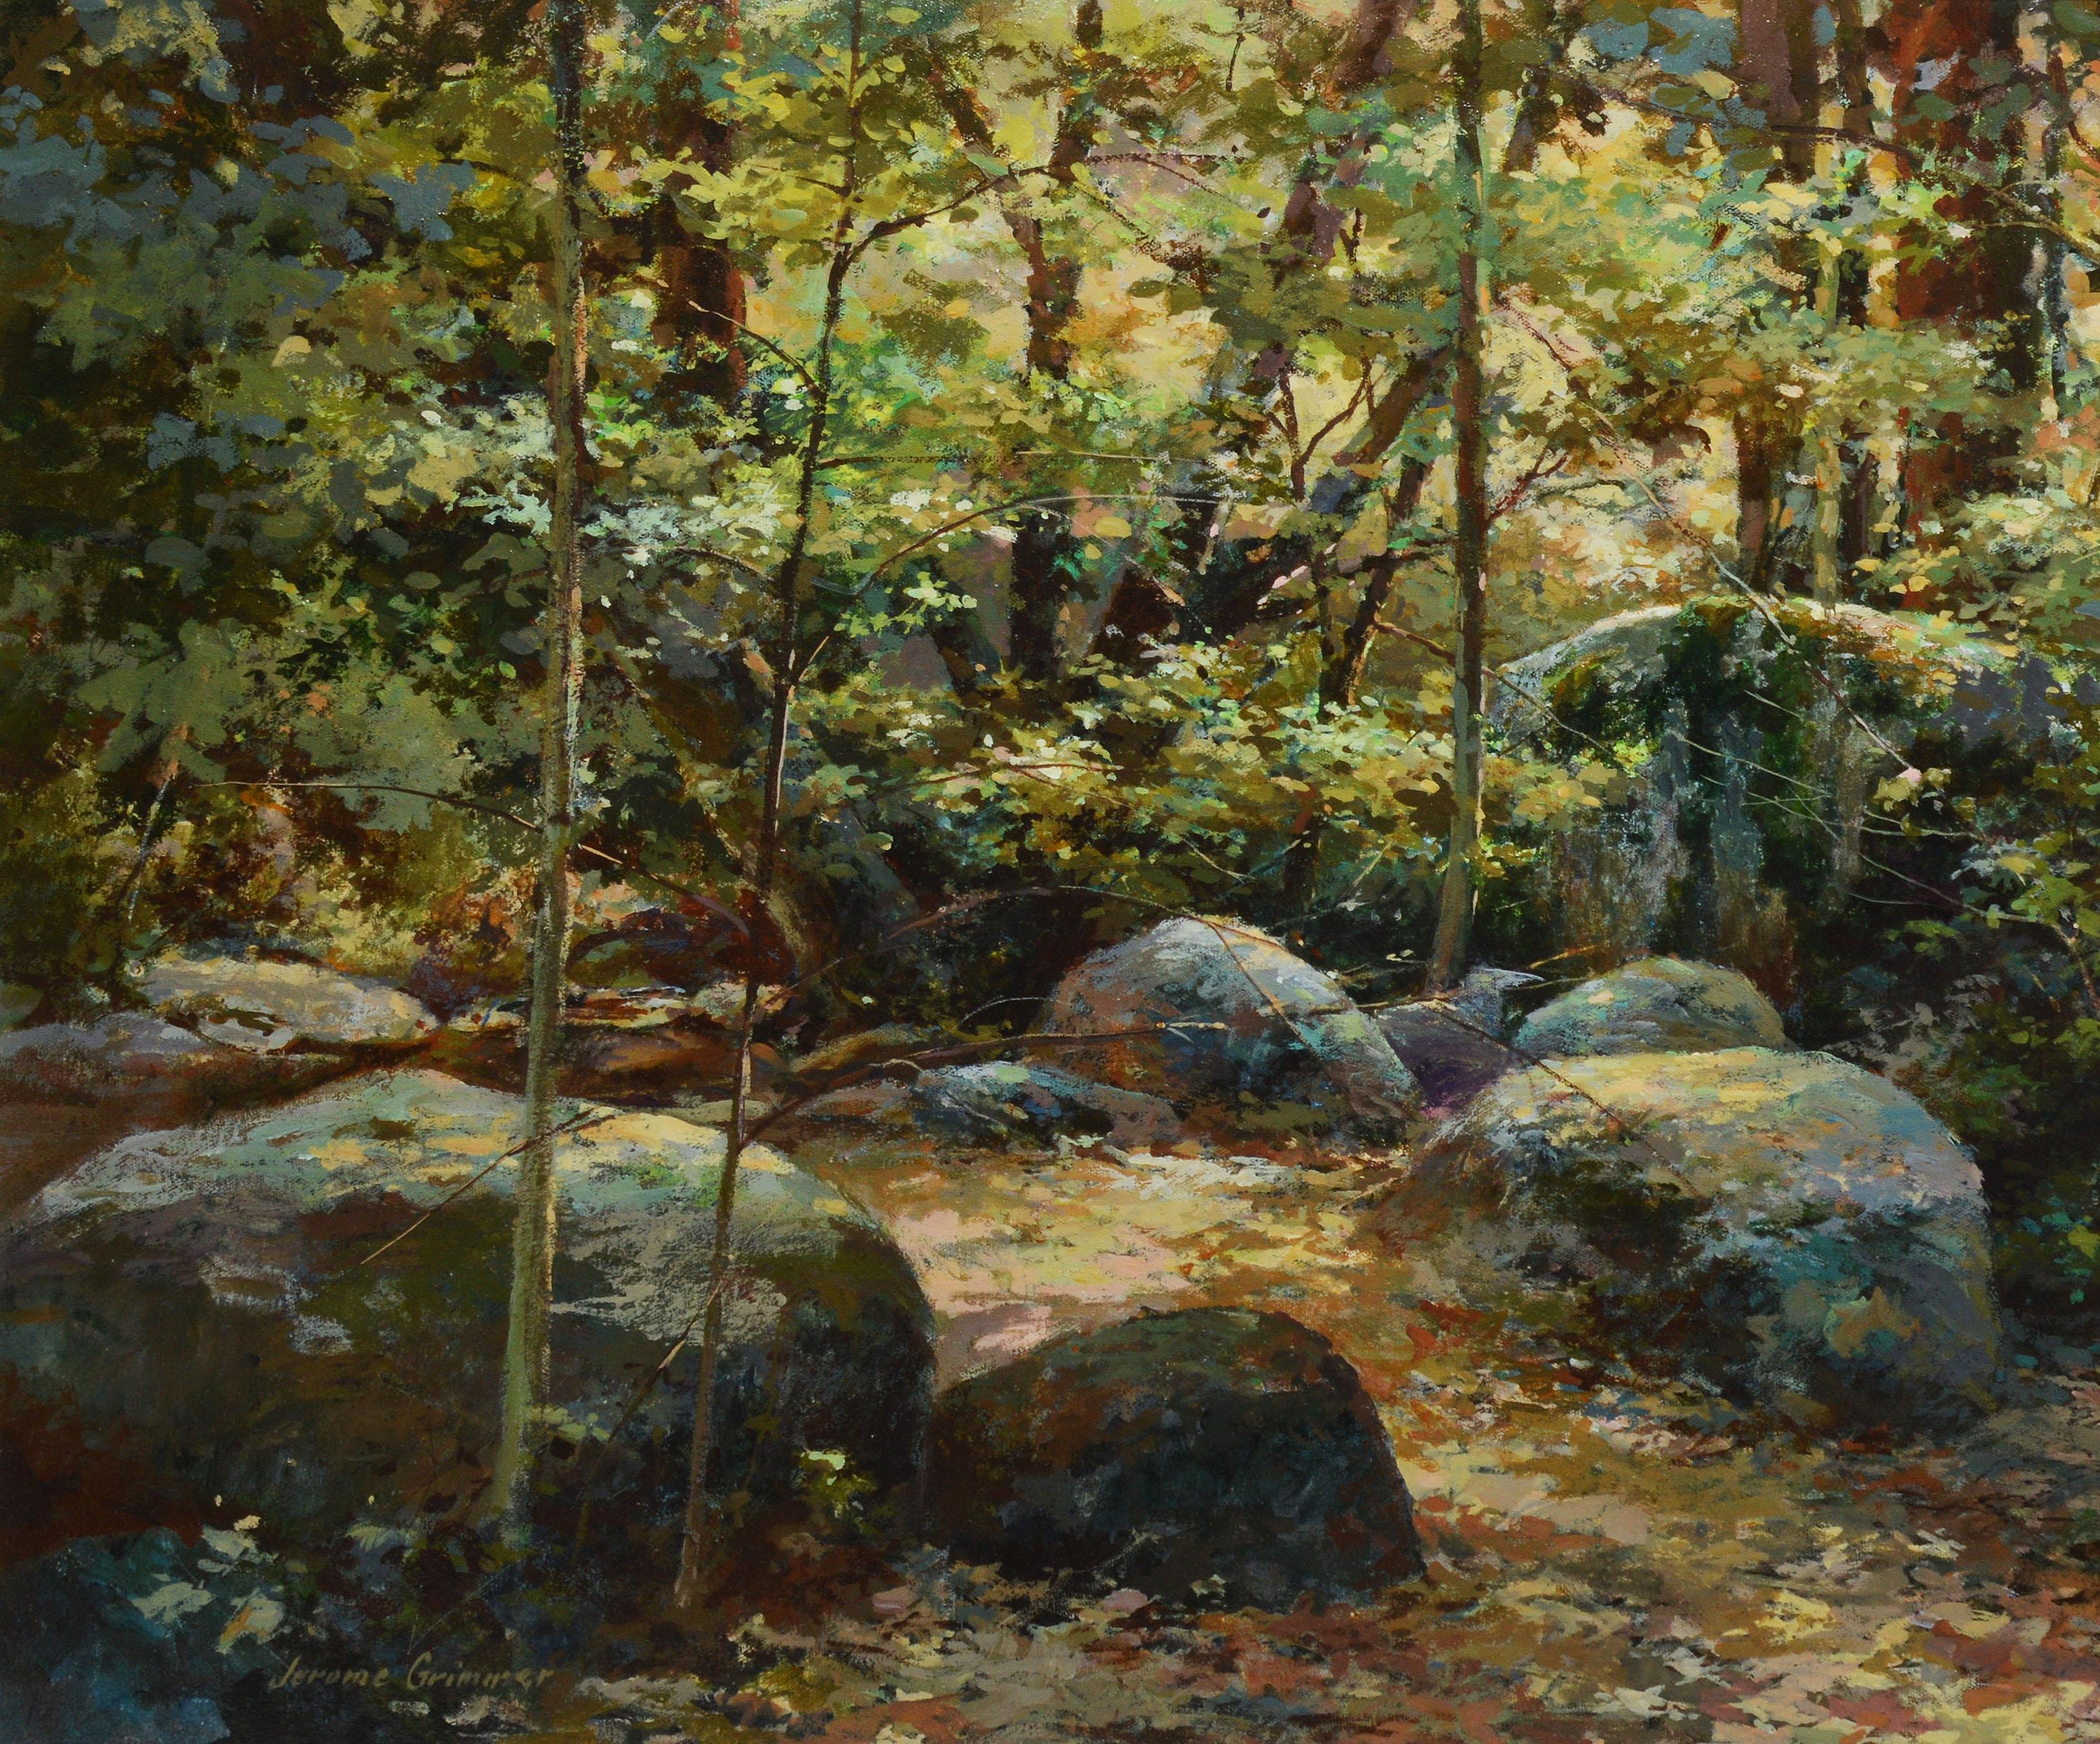 Impressionist forest view by Jerome Grimmer  (born 1939).  Oil on canvas, circa 1970.  Signed.  Displayed in a giltwood frame.  Image size, 30